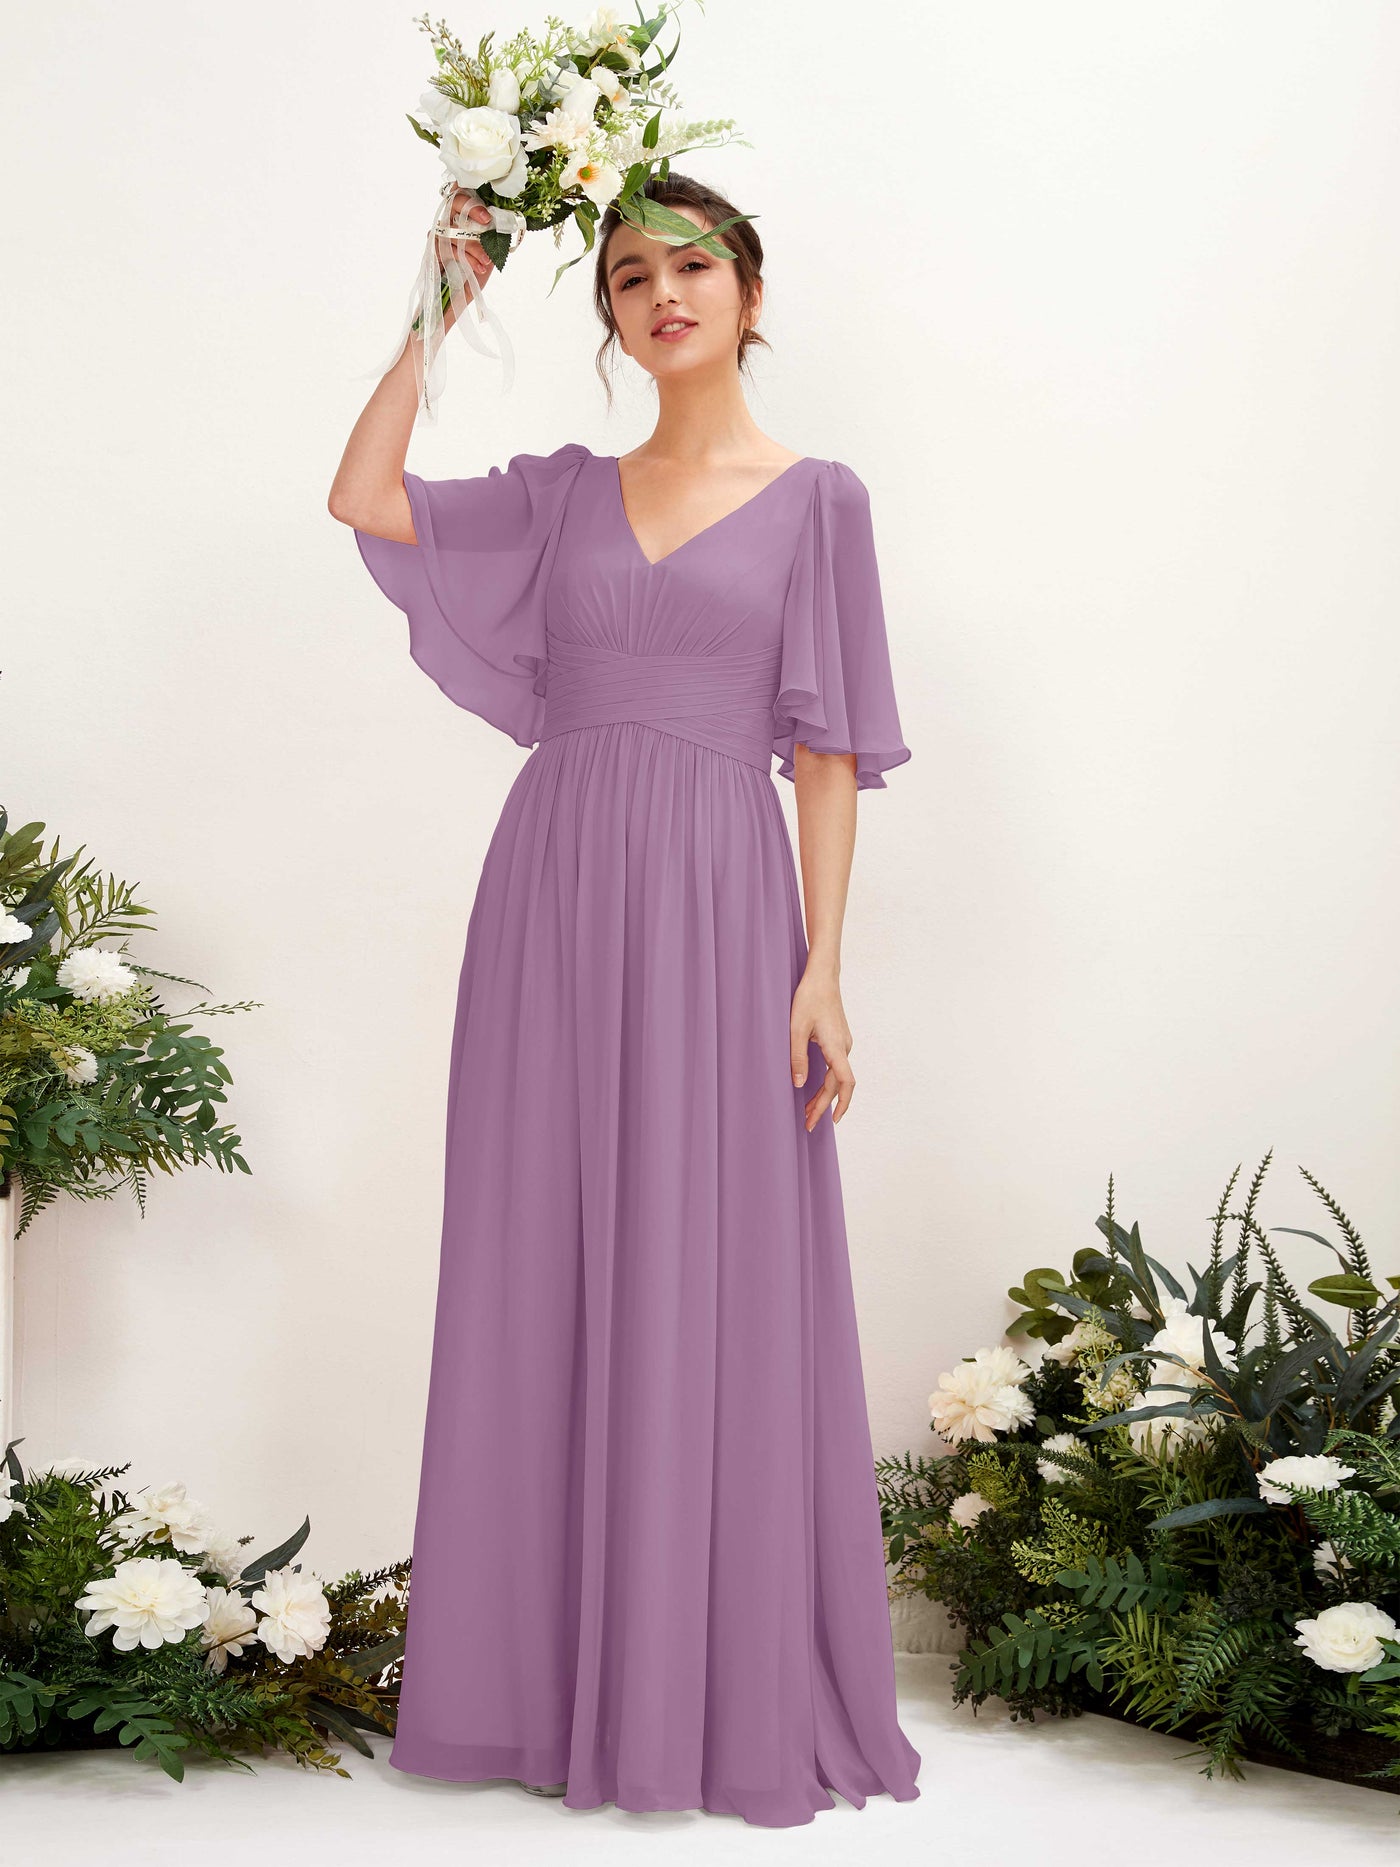 Orchid Mist Bridesmaid Dresses Bridesmaid Dress A-line Chiffon V-neck Full Length 1/2 Sleeves Wedding Party Dress (81221621)#color_orchid-mist